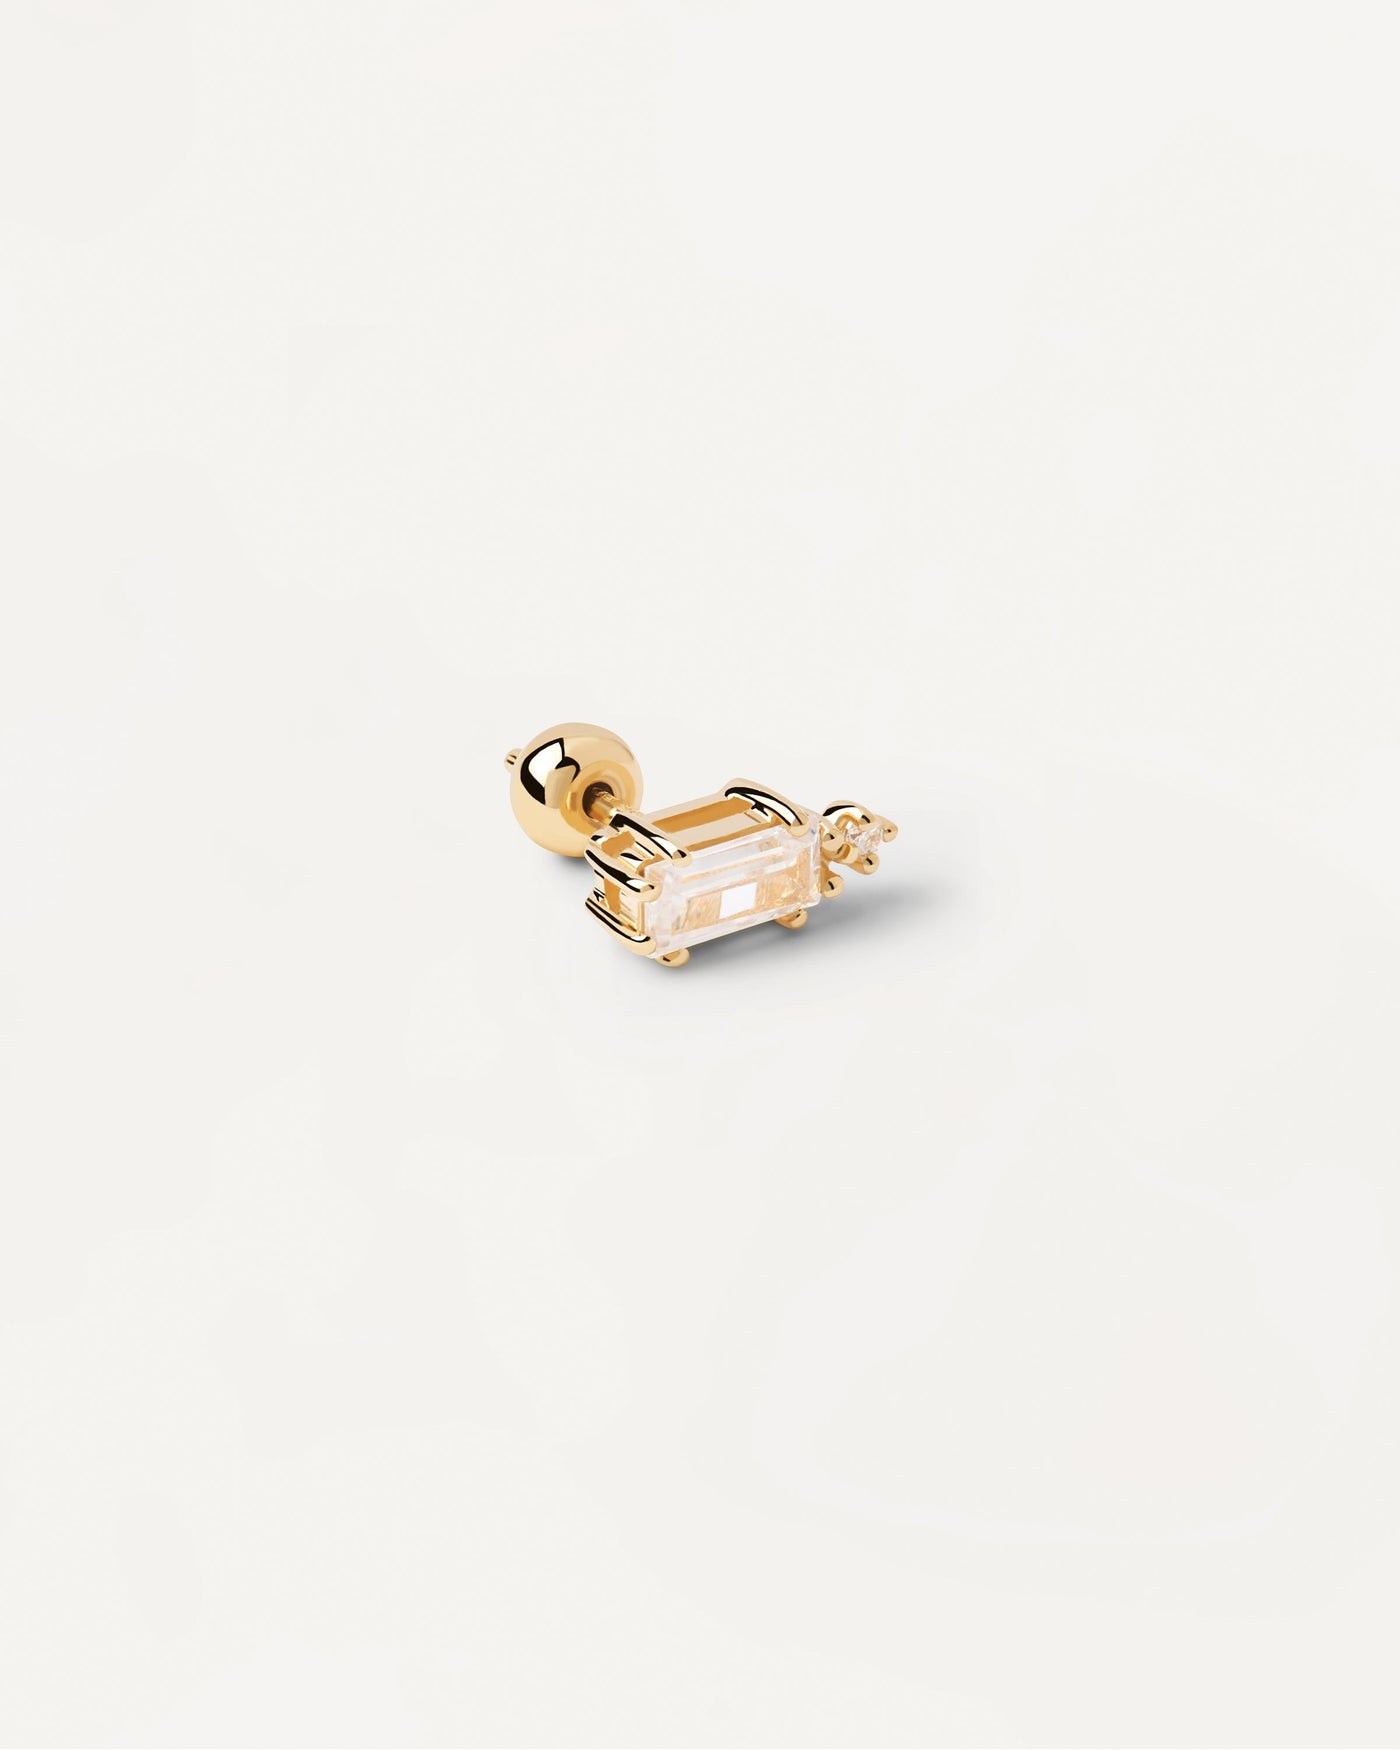 2023 Selection | Bea Single Earring. Gold-plated ear piercing with baguette cut white crystal. Get the latest arrival from PDPAOLA. Place your order safely and get this Best Seller. Free Shipping.